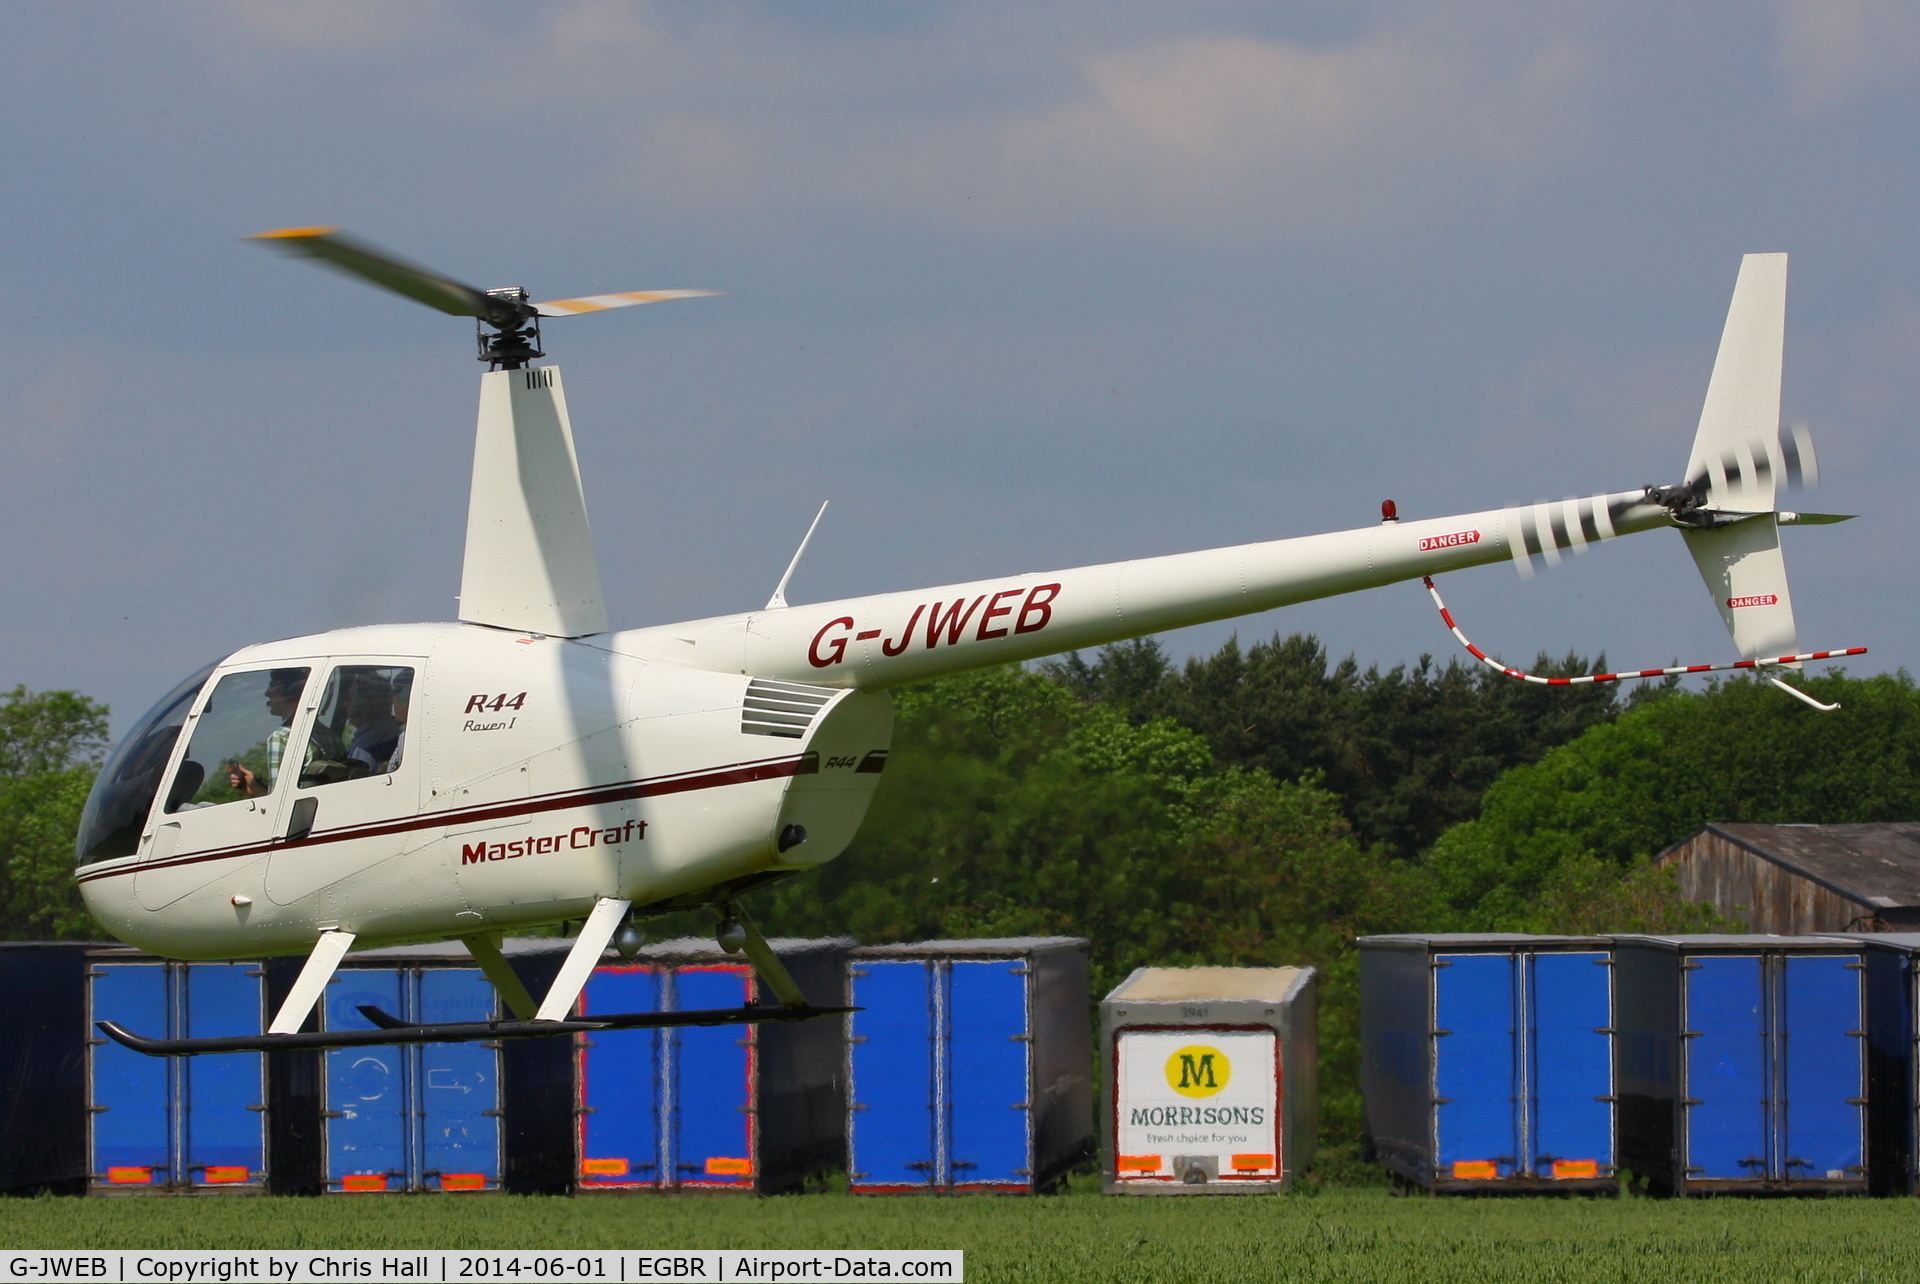 G-JWEB, 2003 Robinson R44 Raven C/N 1334, at Breighton's Open Cockpit & Biplane Fly-in, 2014